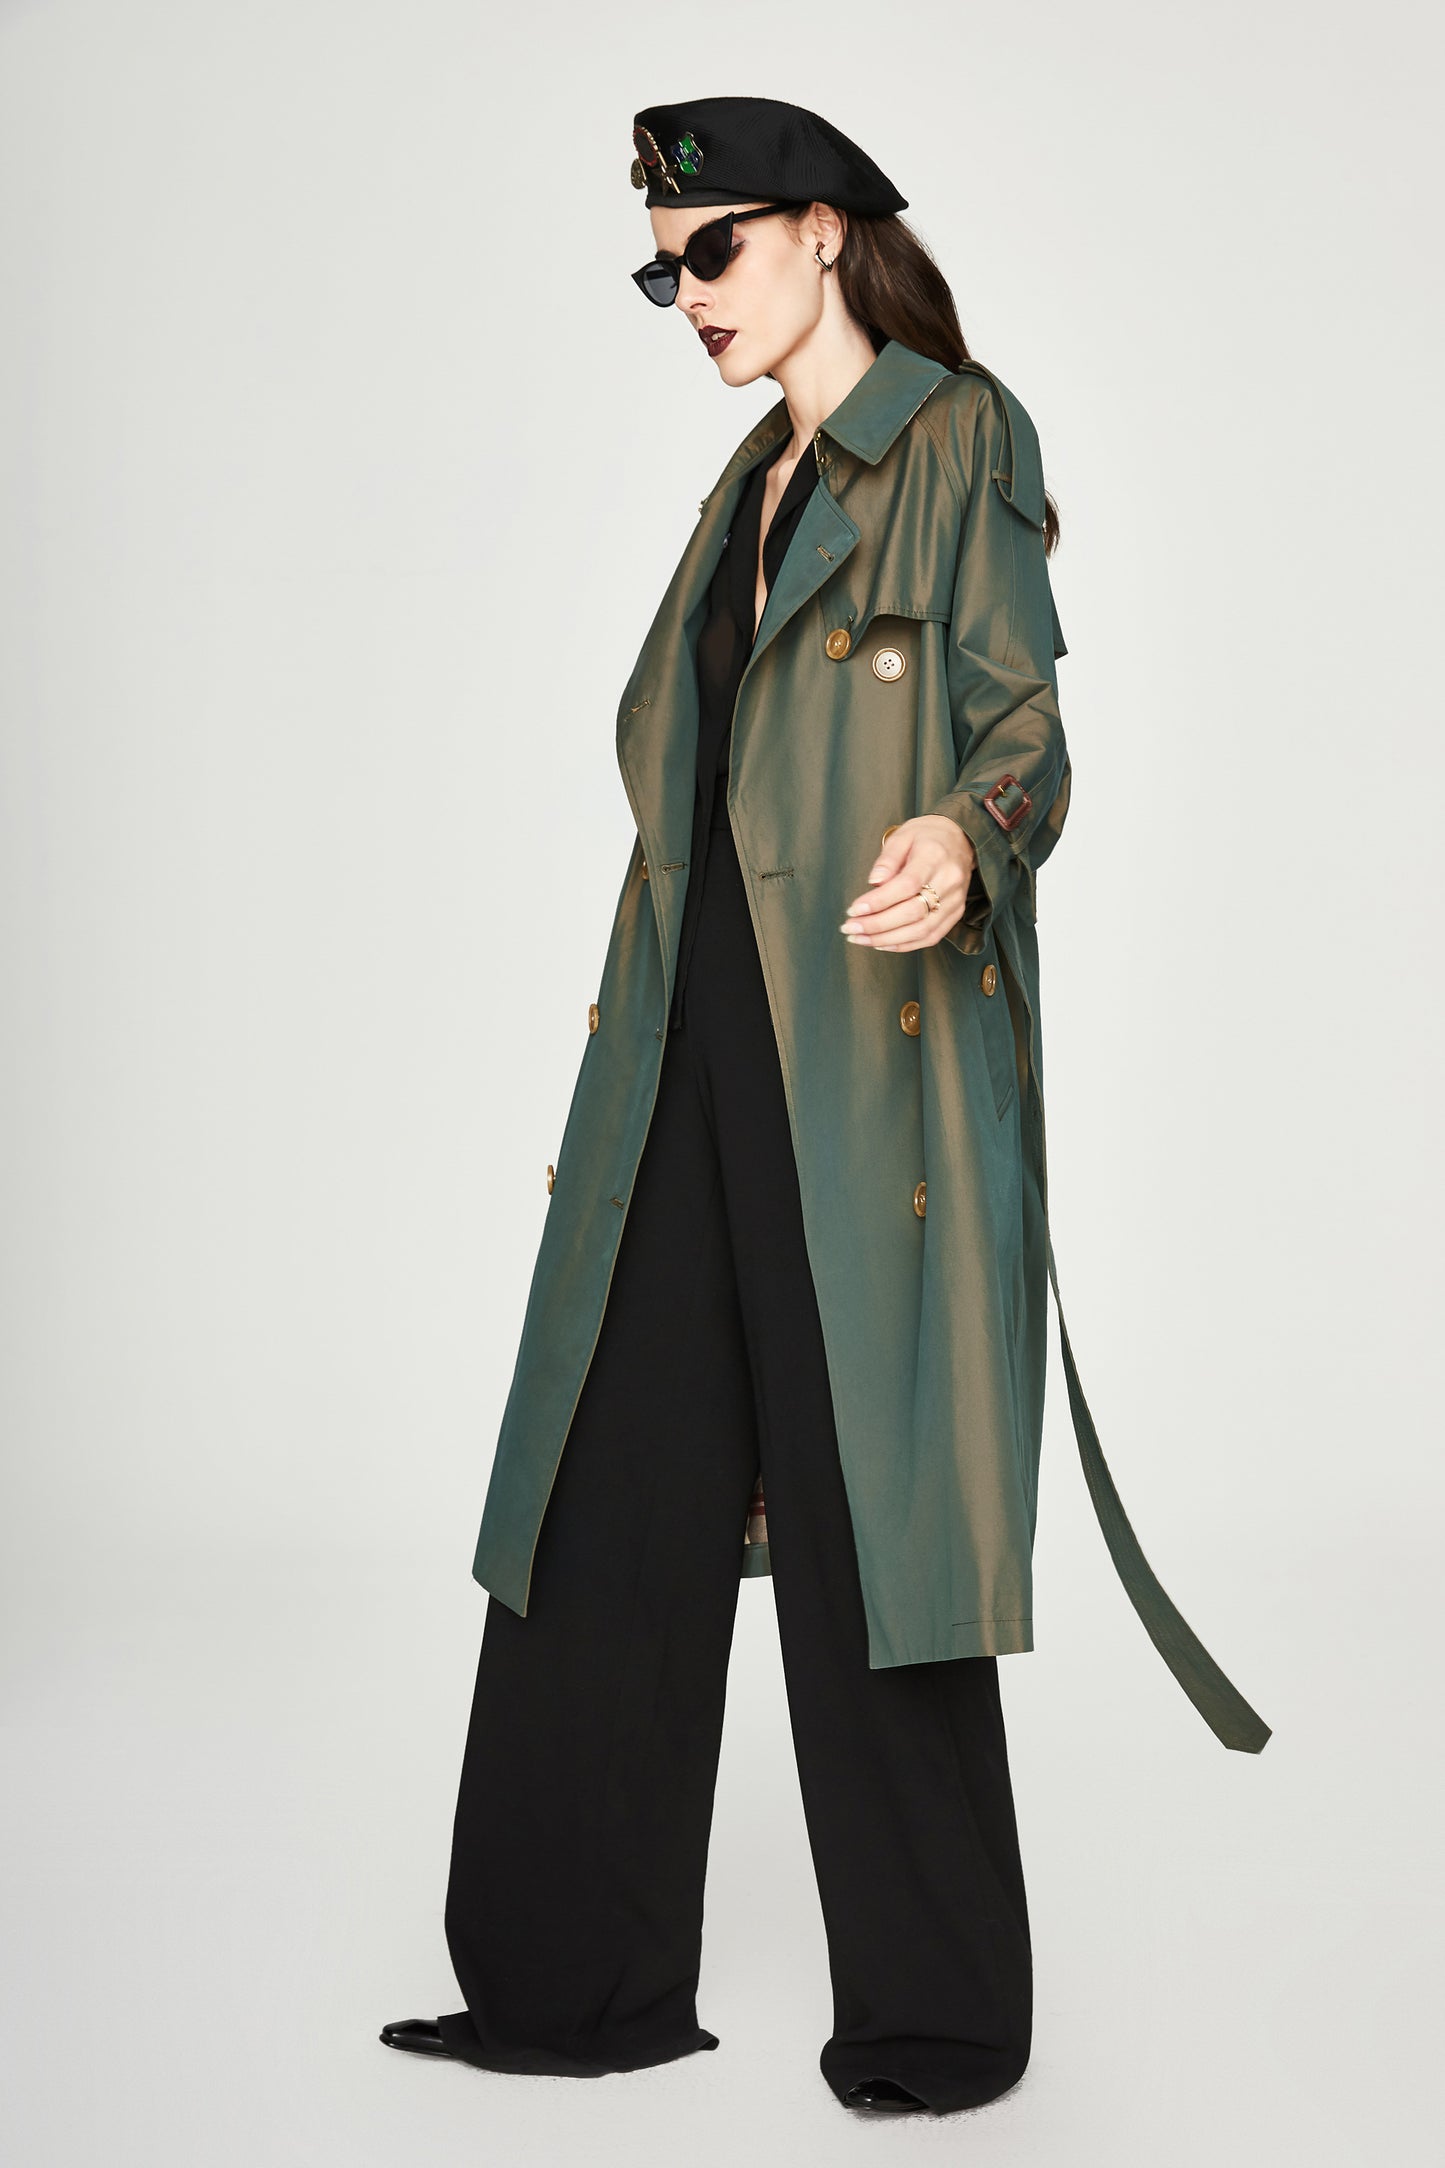 Women Clothing Double-Breasted Extended Trench Coat Women Coat Chameleon Trench Coat Women Coat